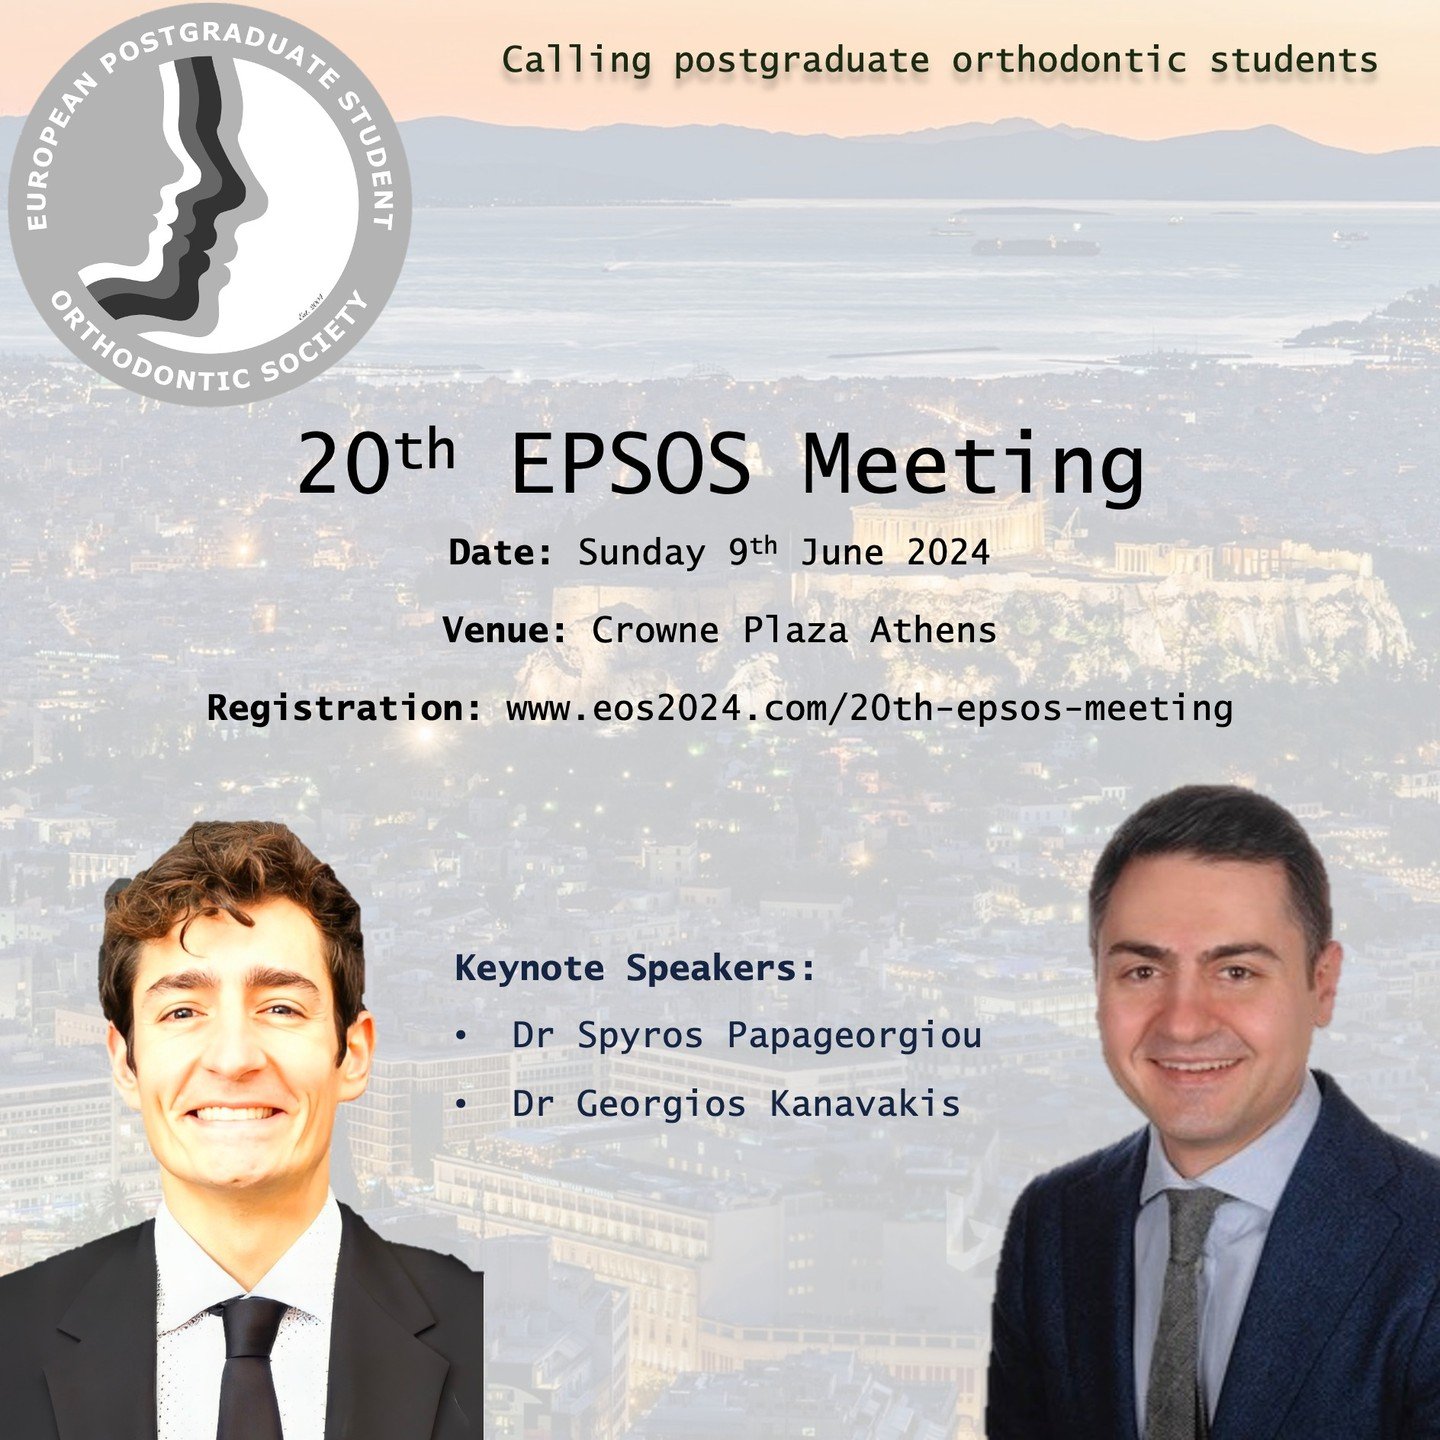 We are thrilled to introduce our keynote speakers, Dr Spyridon Papageorgiou and Dr Georgios Kanavaki!

Dr Papageorgiou is a Clinic Coordinator and Deputy Director in the University of Zurich and a Visiting Senior Lecturer in King&rsquo;s College Lond